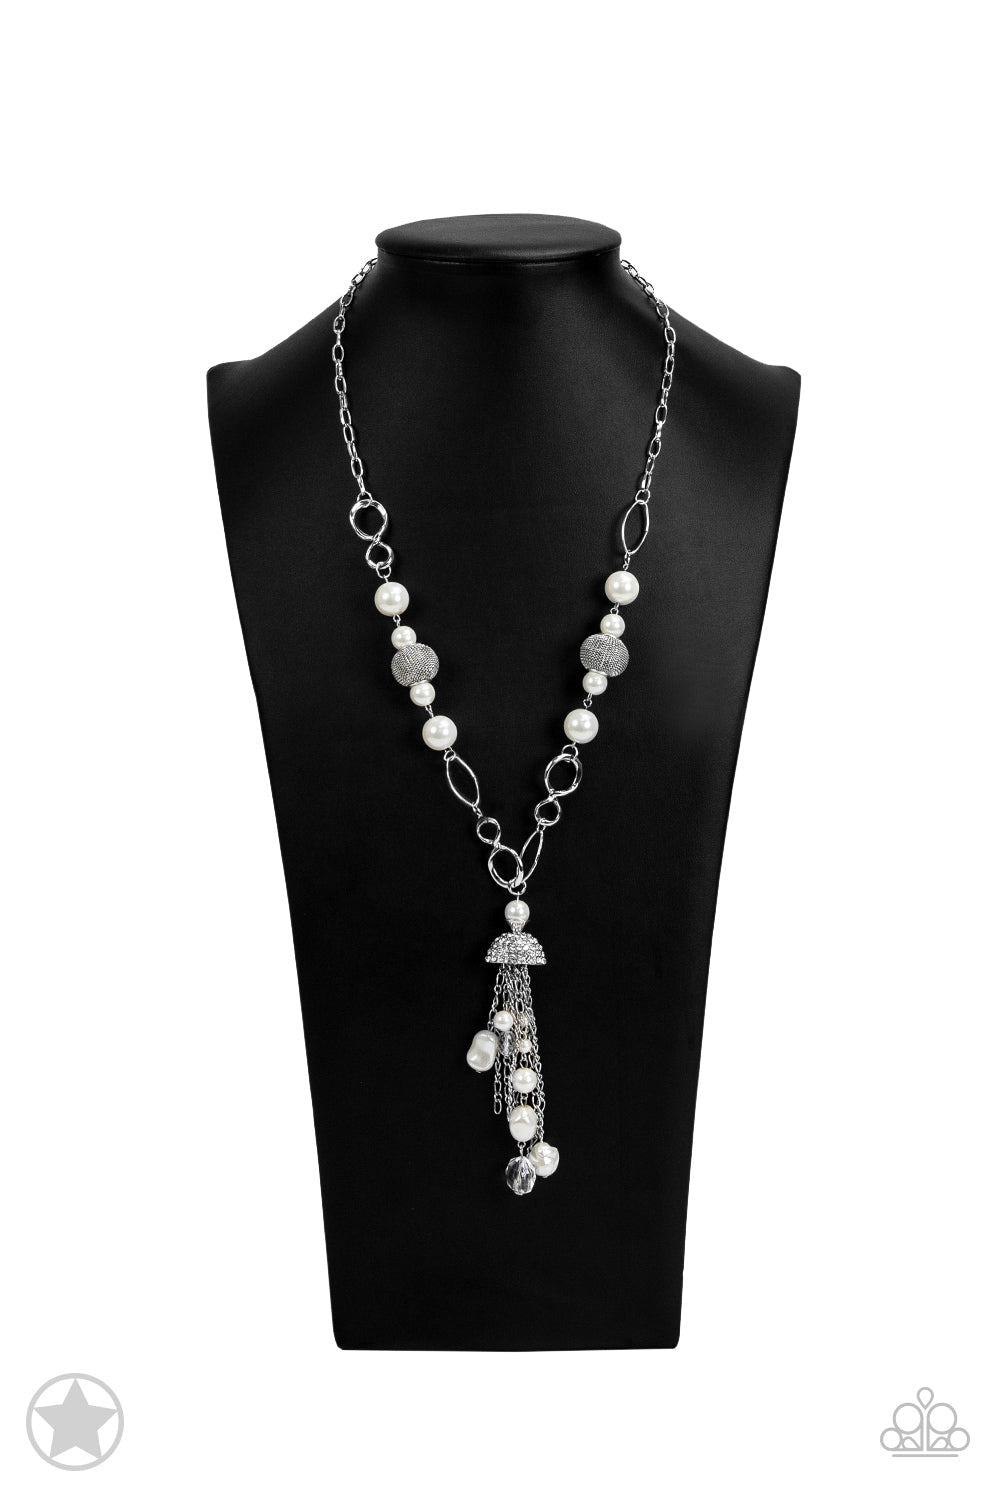 Designated Diva - White Pearl Necklace - Paparazzi Accessories - A half-shell studded in rhinestones overhangs a cluster of ivory pearls, tassels of silver chain, and small crystals. Two large wire mesh spheres and larger ivory pearls decorate the neckline.